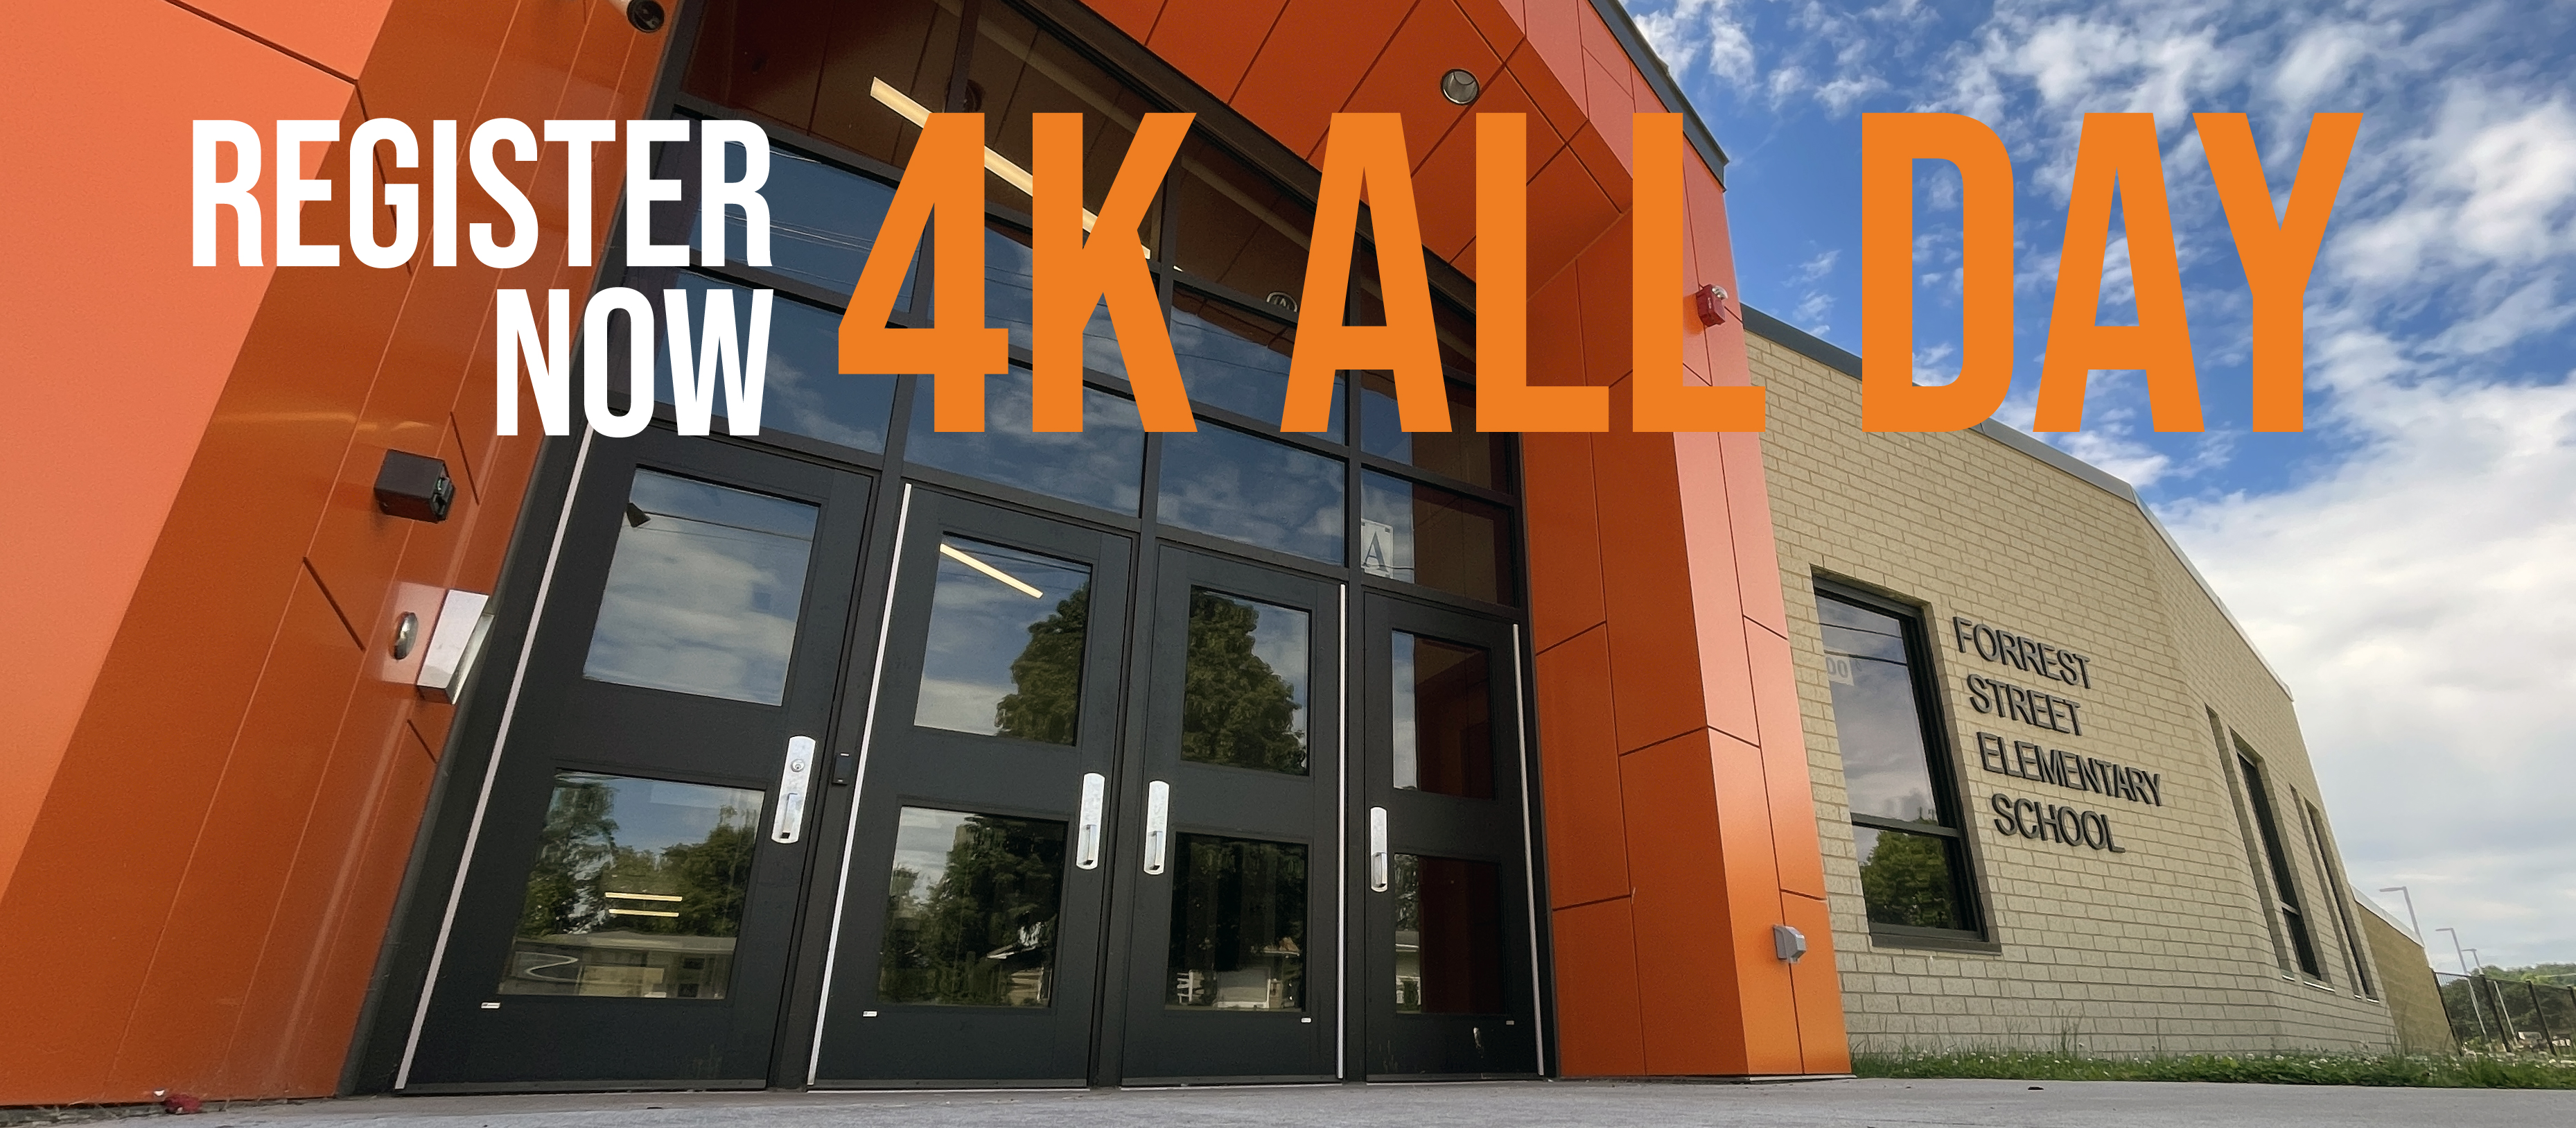 Photo of school doors. Text on image says "register now 4K all day"